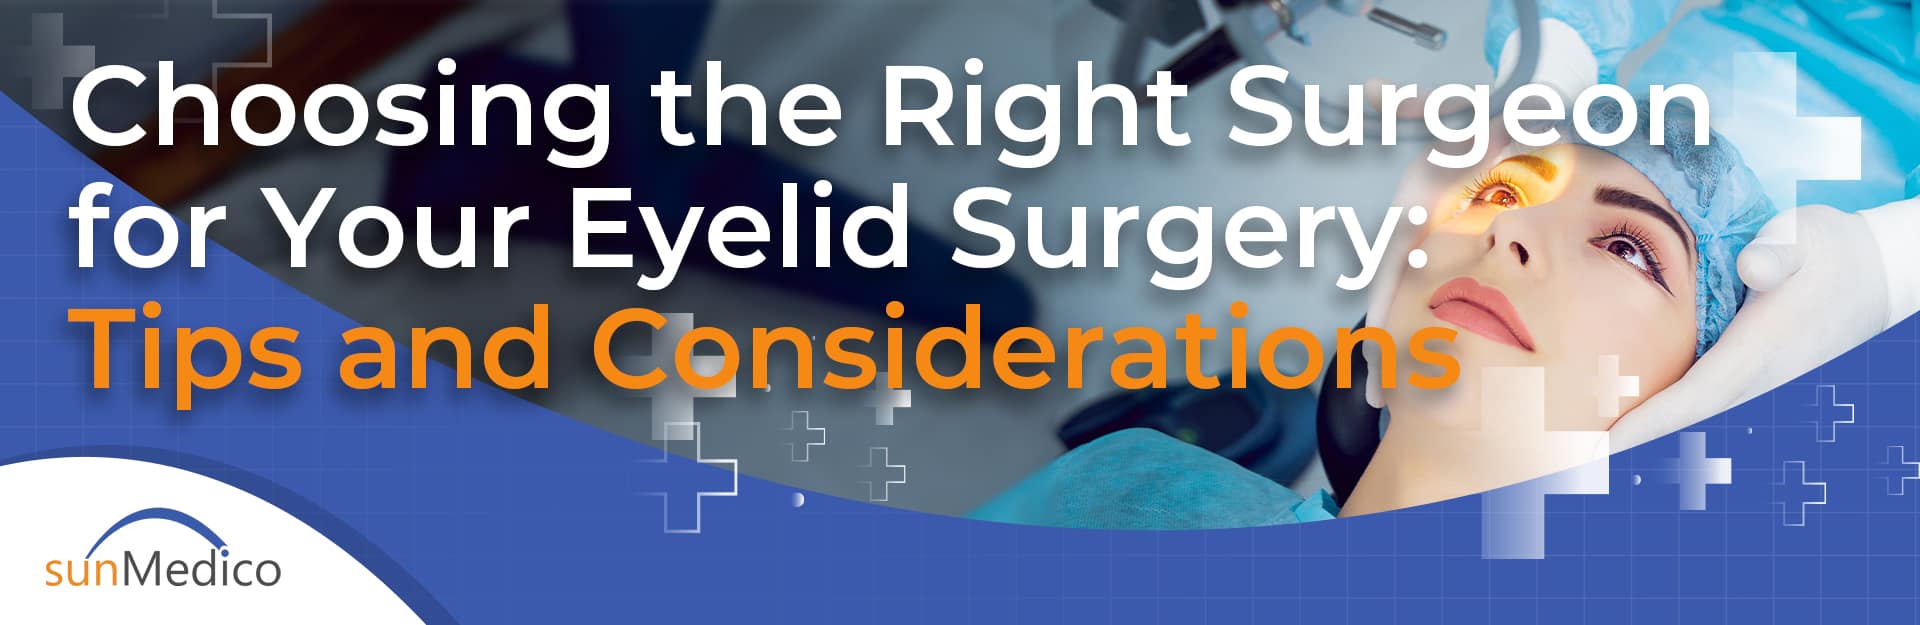 Choosing the Right Surgeon for Your Eyelid Surgery: Tips and Considerations